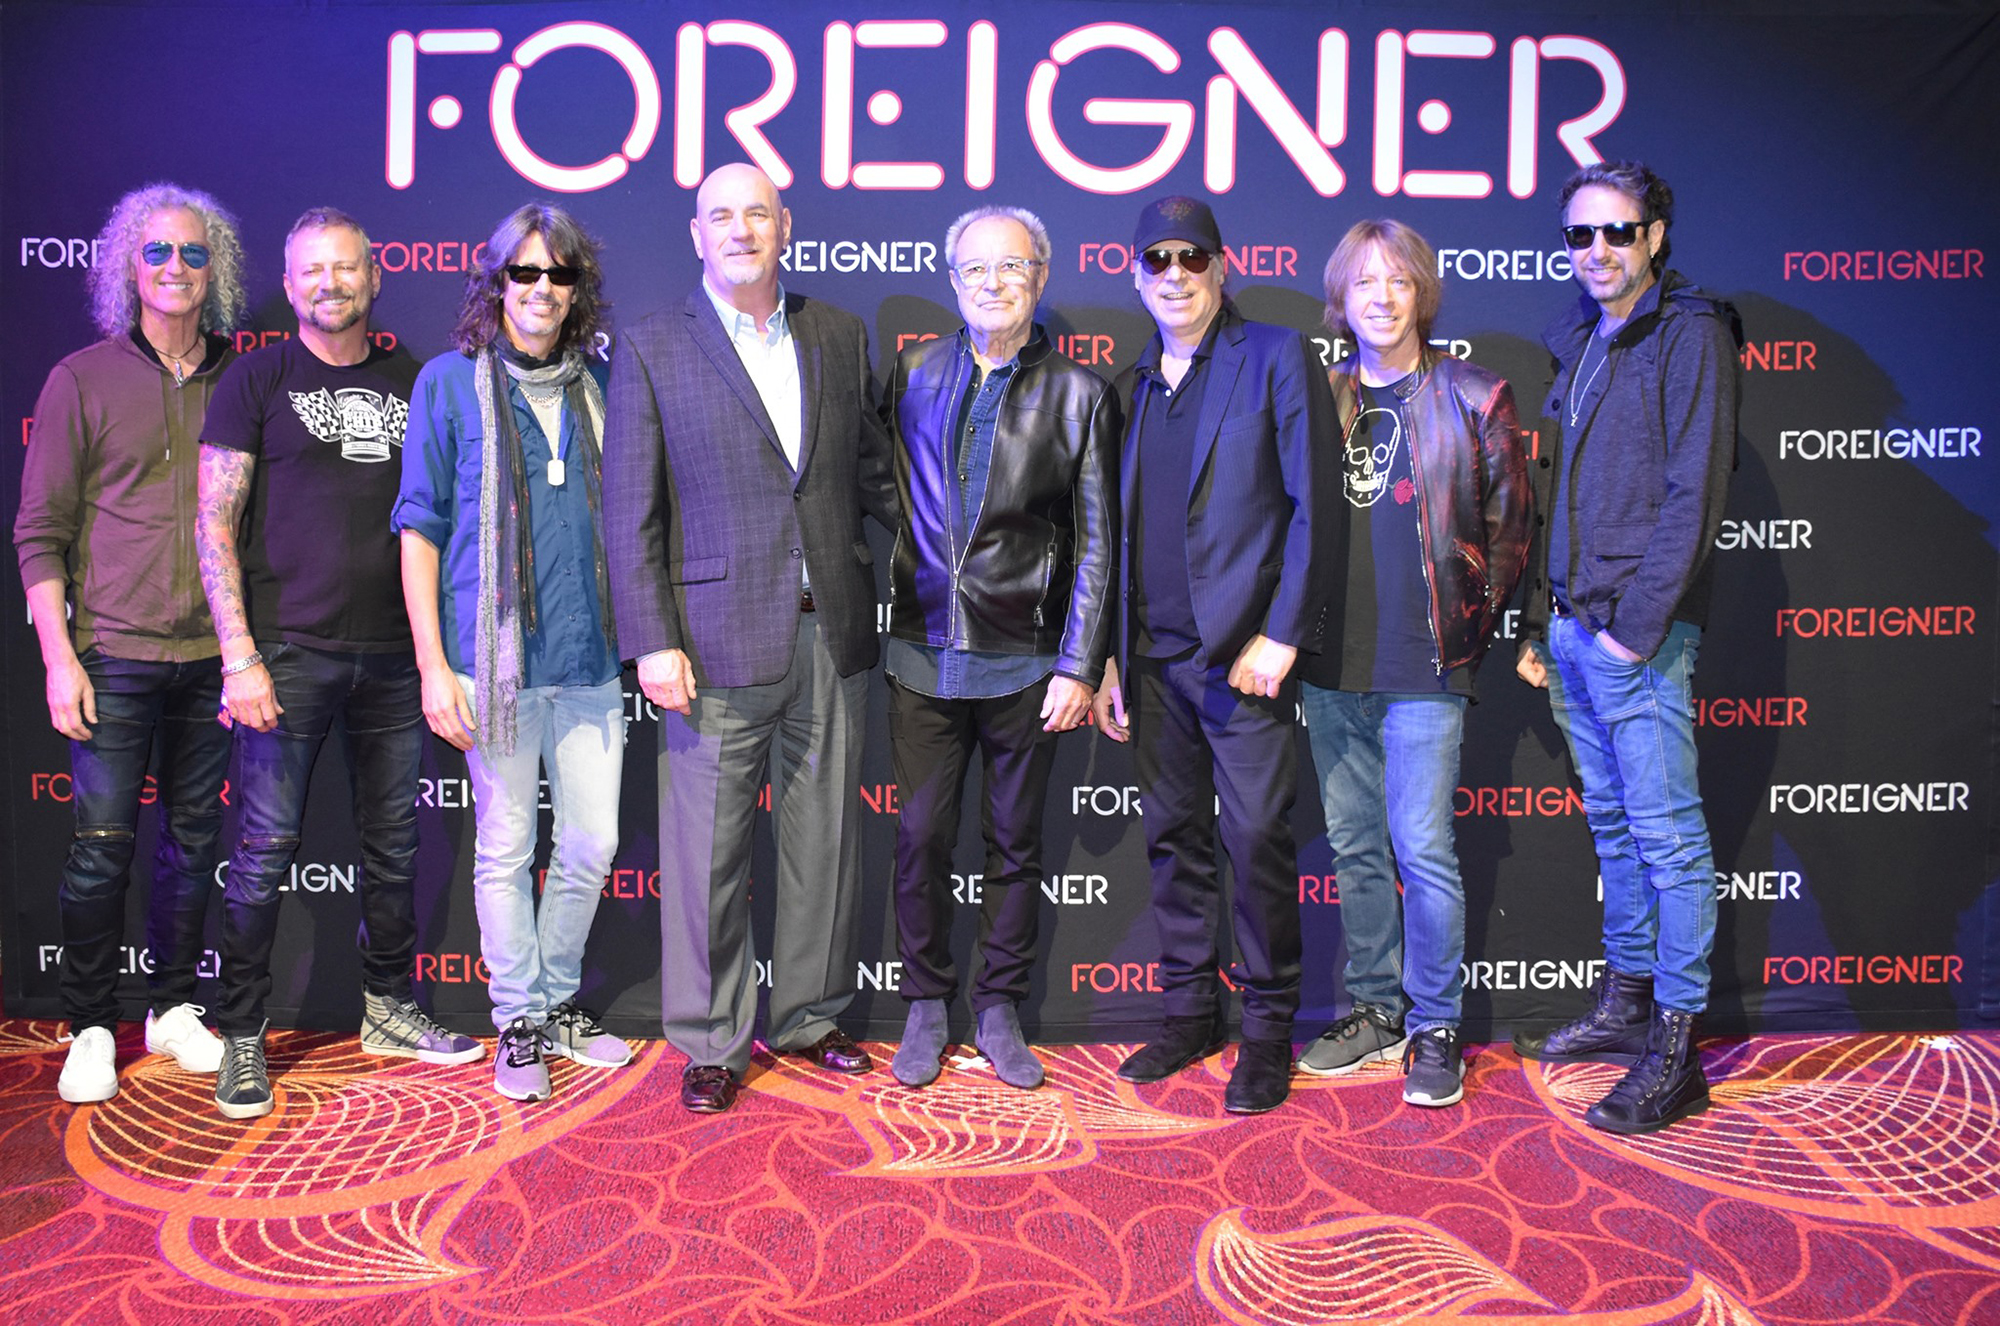 with the band Foreigner